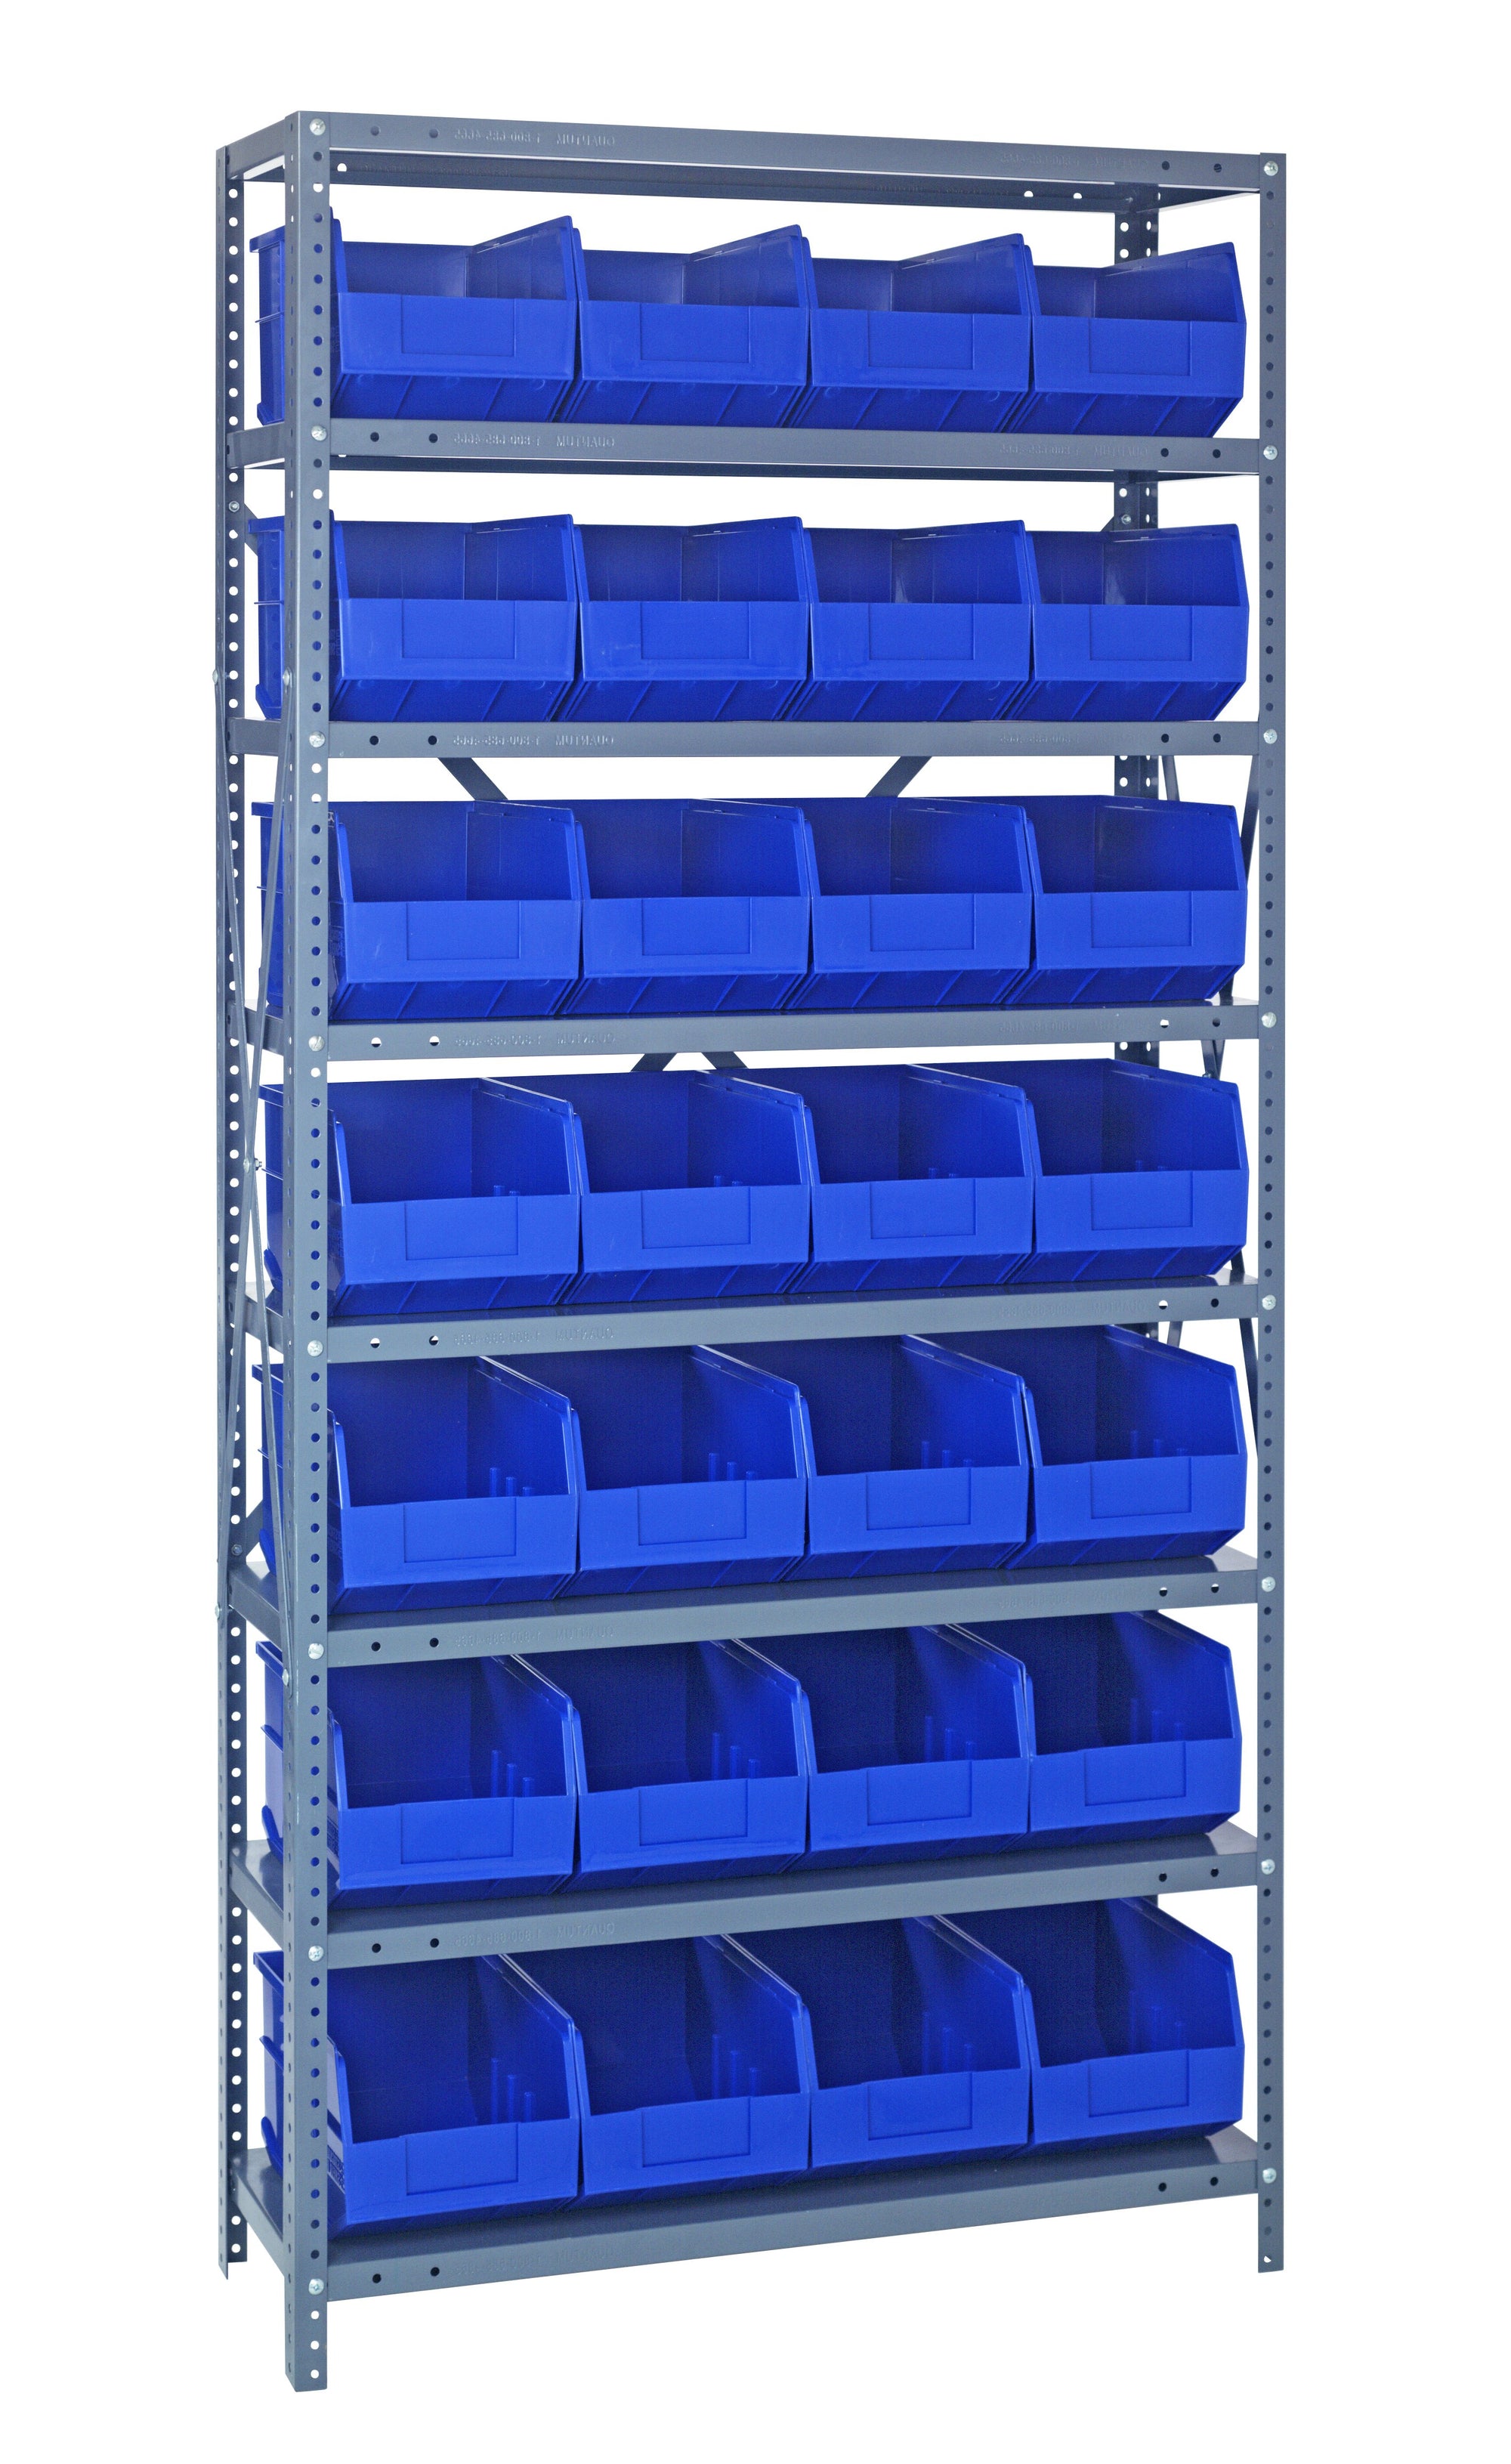 Quantum WR8-239CL Wire Shelving System with 8 Shelves, 12 x 36 x 74